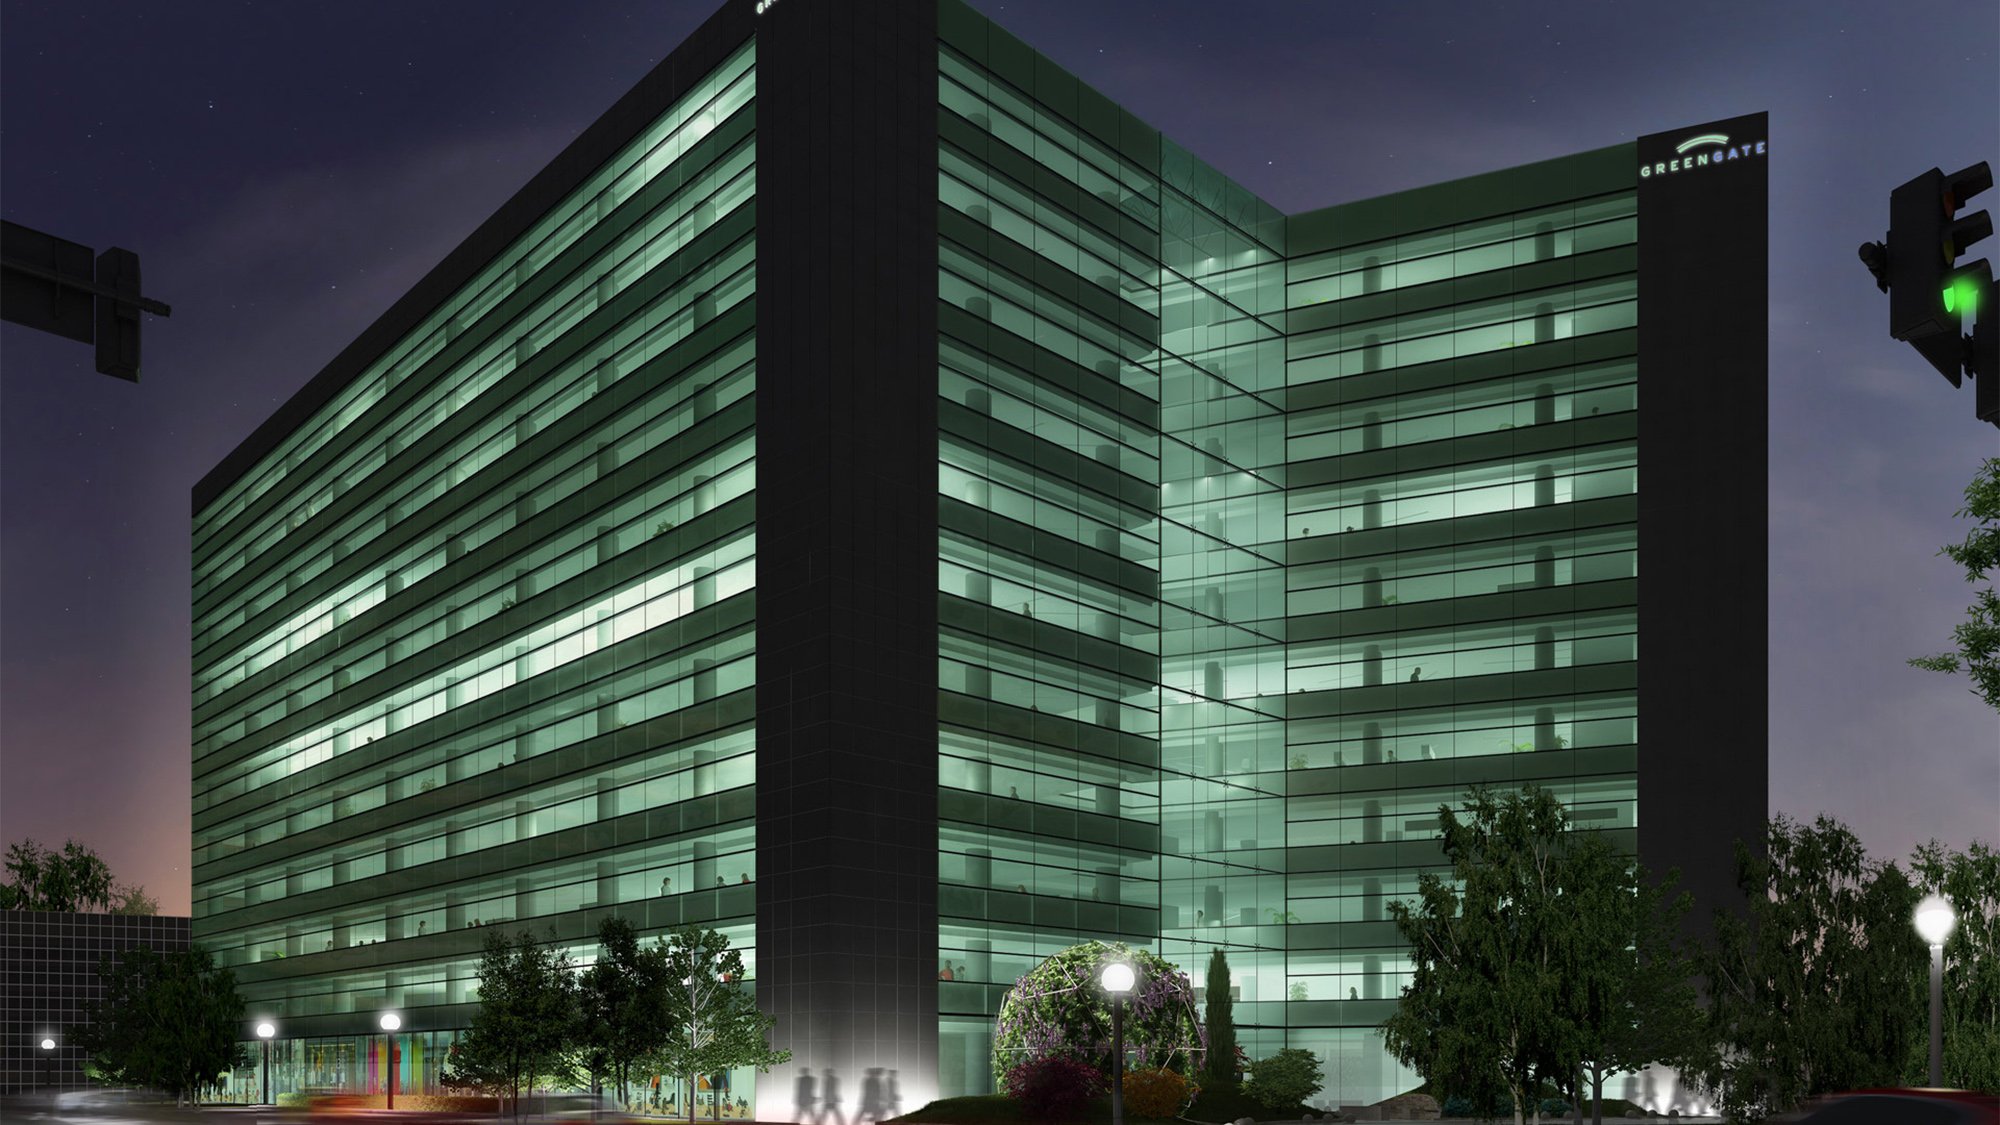 An artist's impression of the Green Gate building at night.